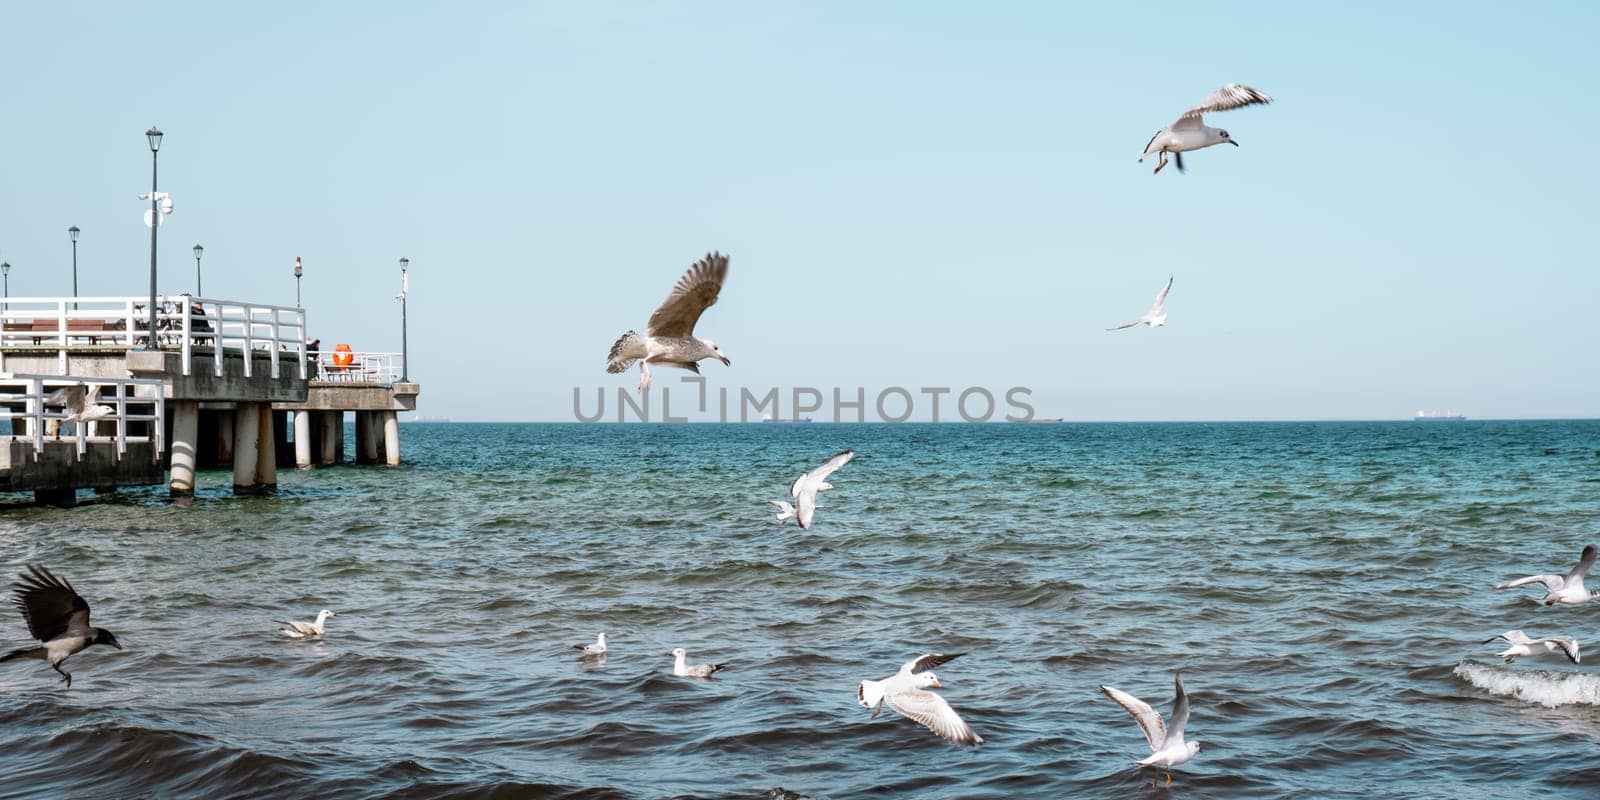 The Sopot molo pier longest in Europe. Baltic Sea and the sun. Seagulls flying on the beach of Baltic Sea waves searching food. Holiday vacation by anna_stasiia